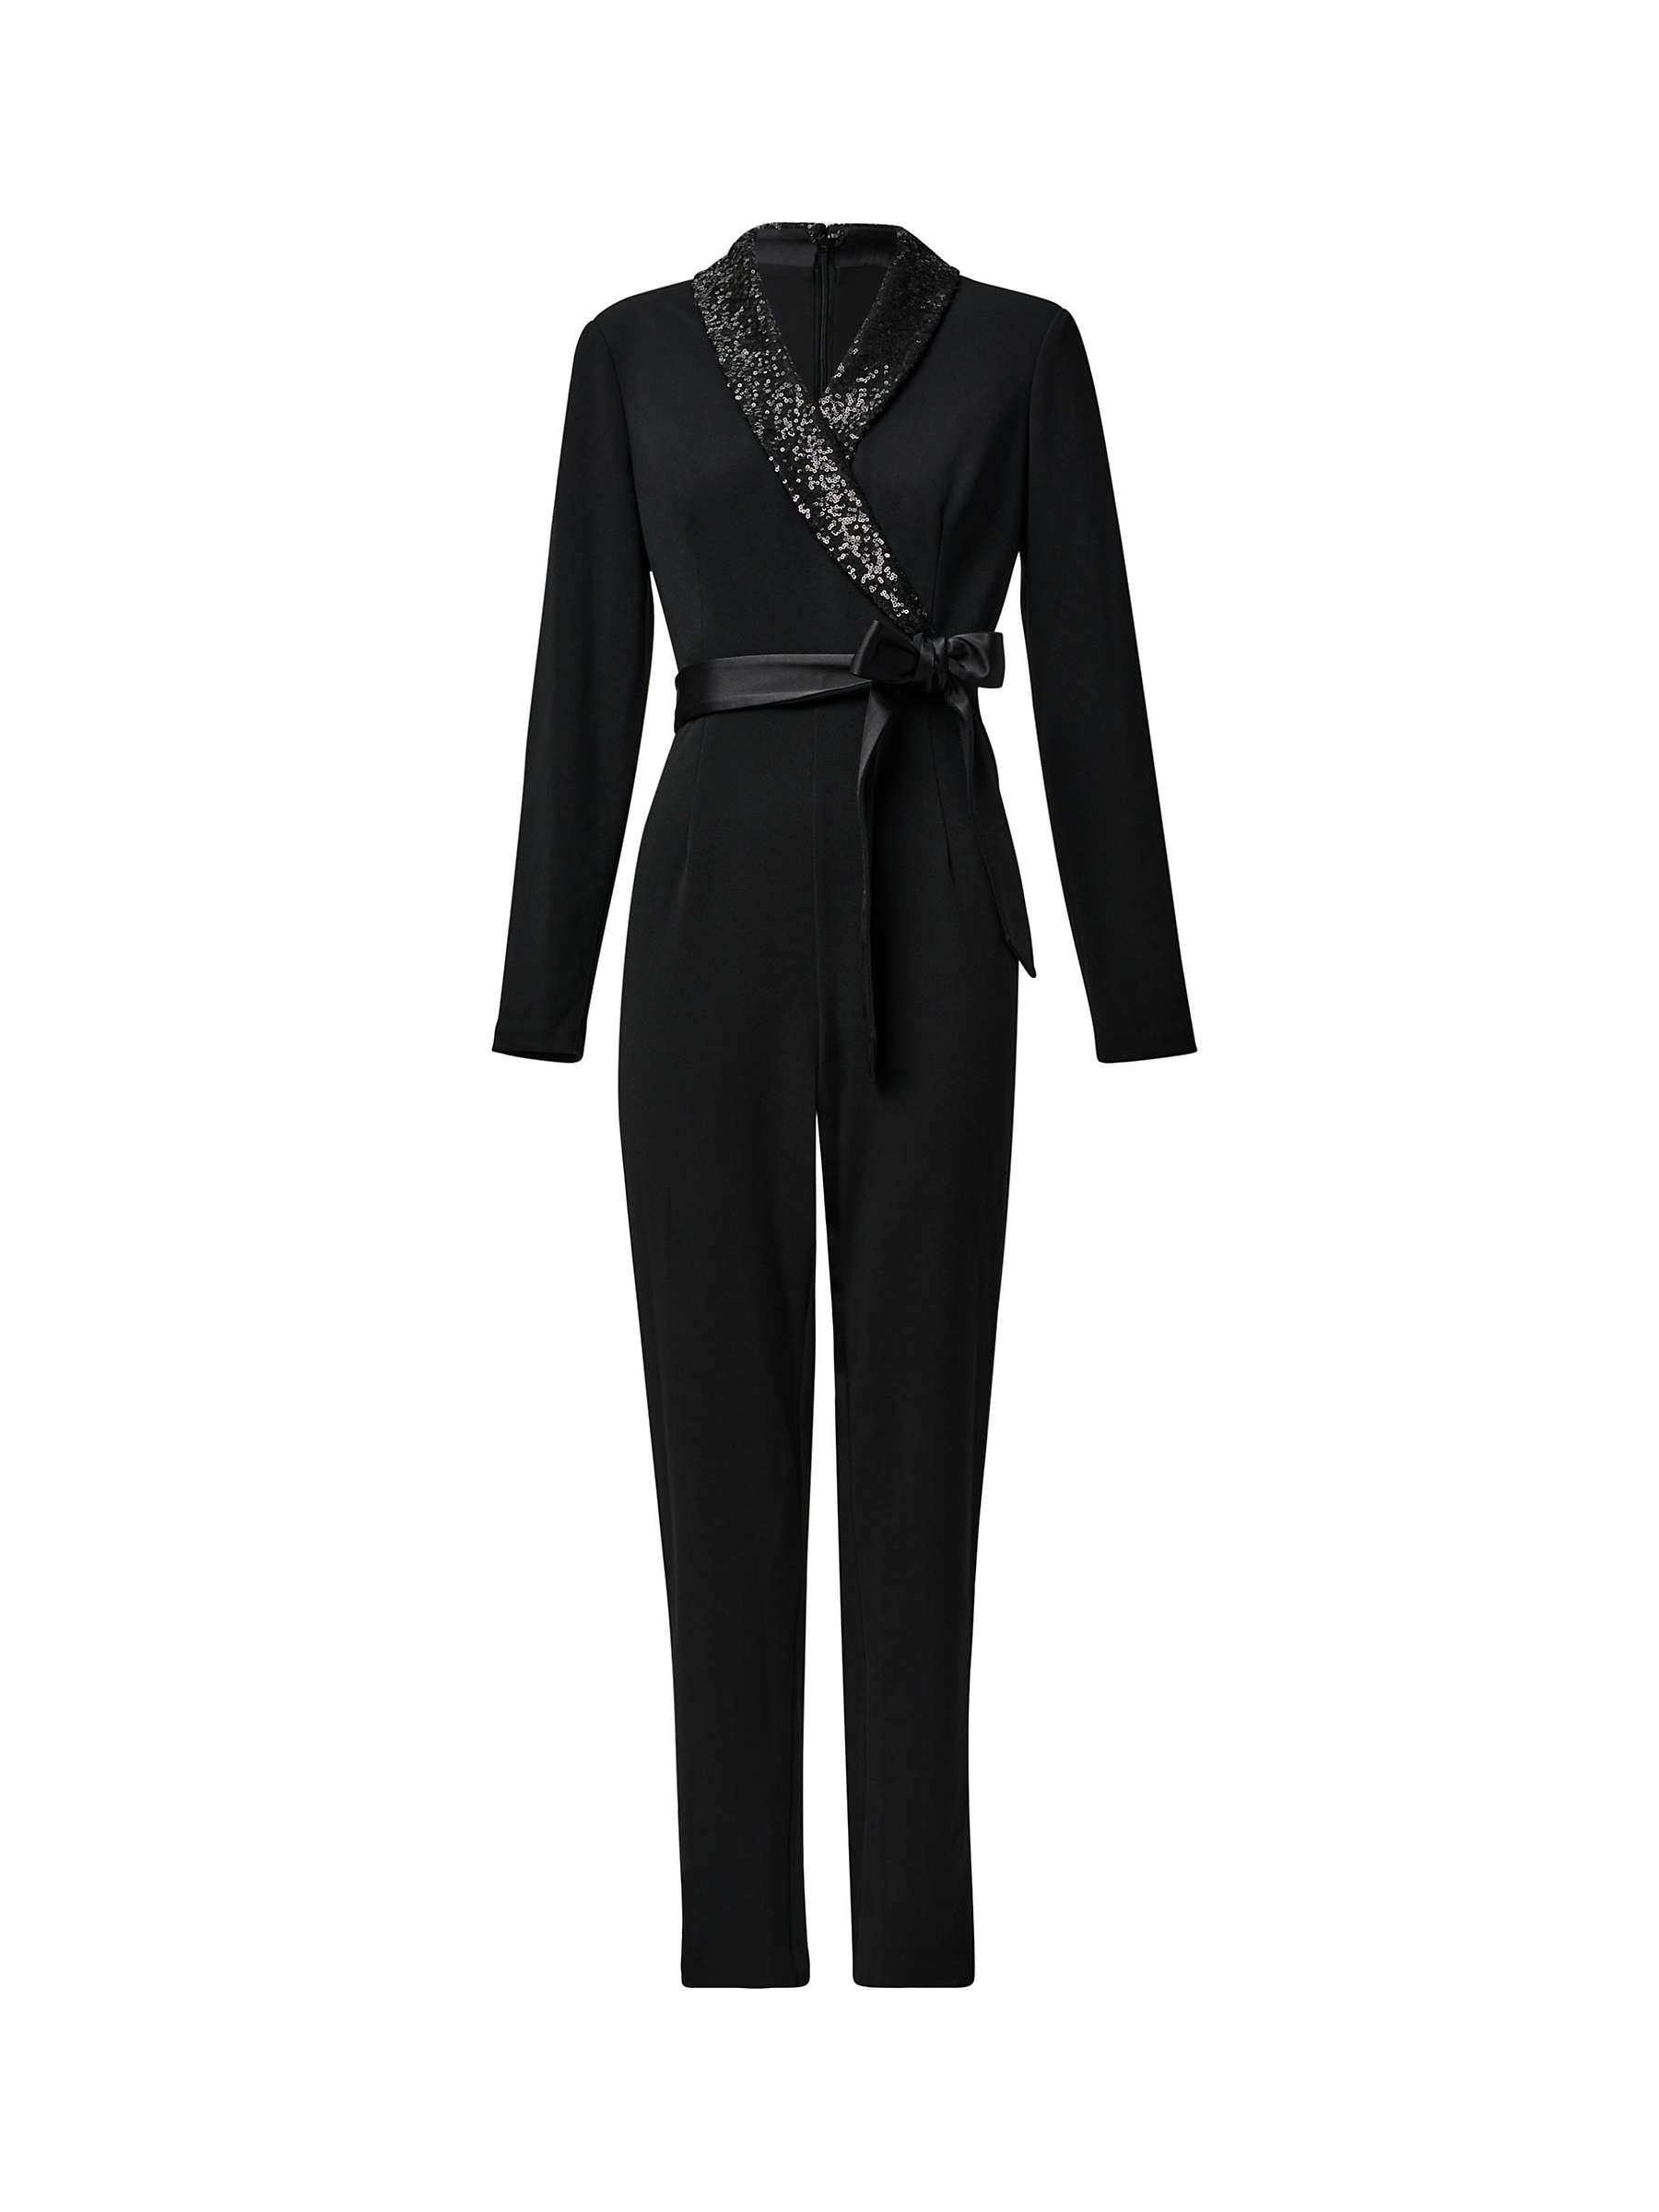 Buy Adrianna Papell Knit Crepe Tuxedo Jumpsuit, Black Online at johnlewis.com